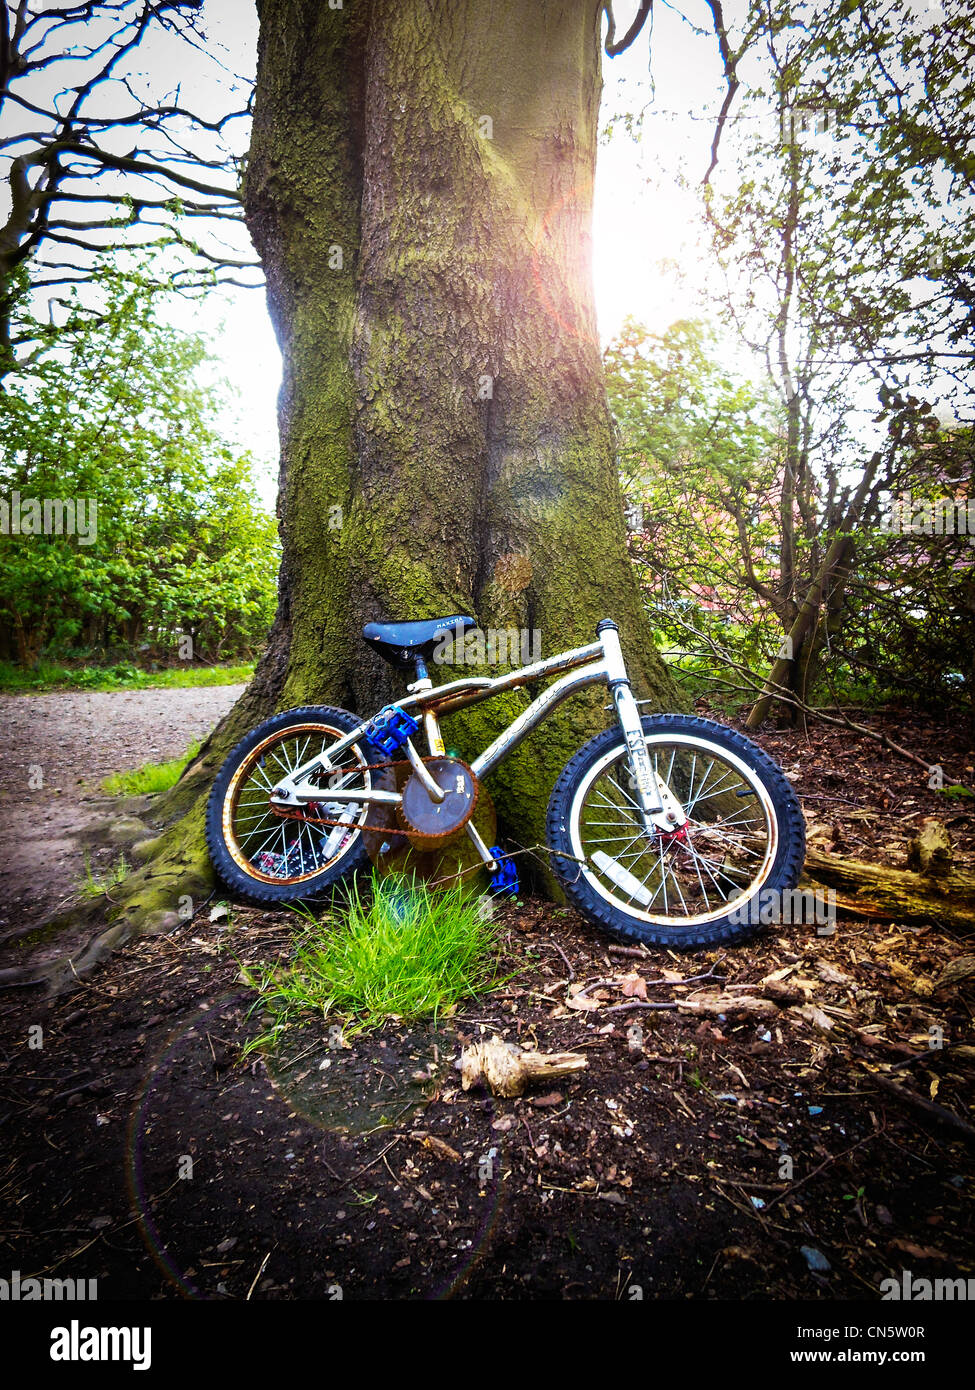 BMX bicycle with no handlebars abandoned in the country against a large tree Stock Photo